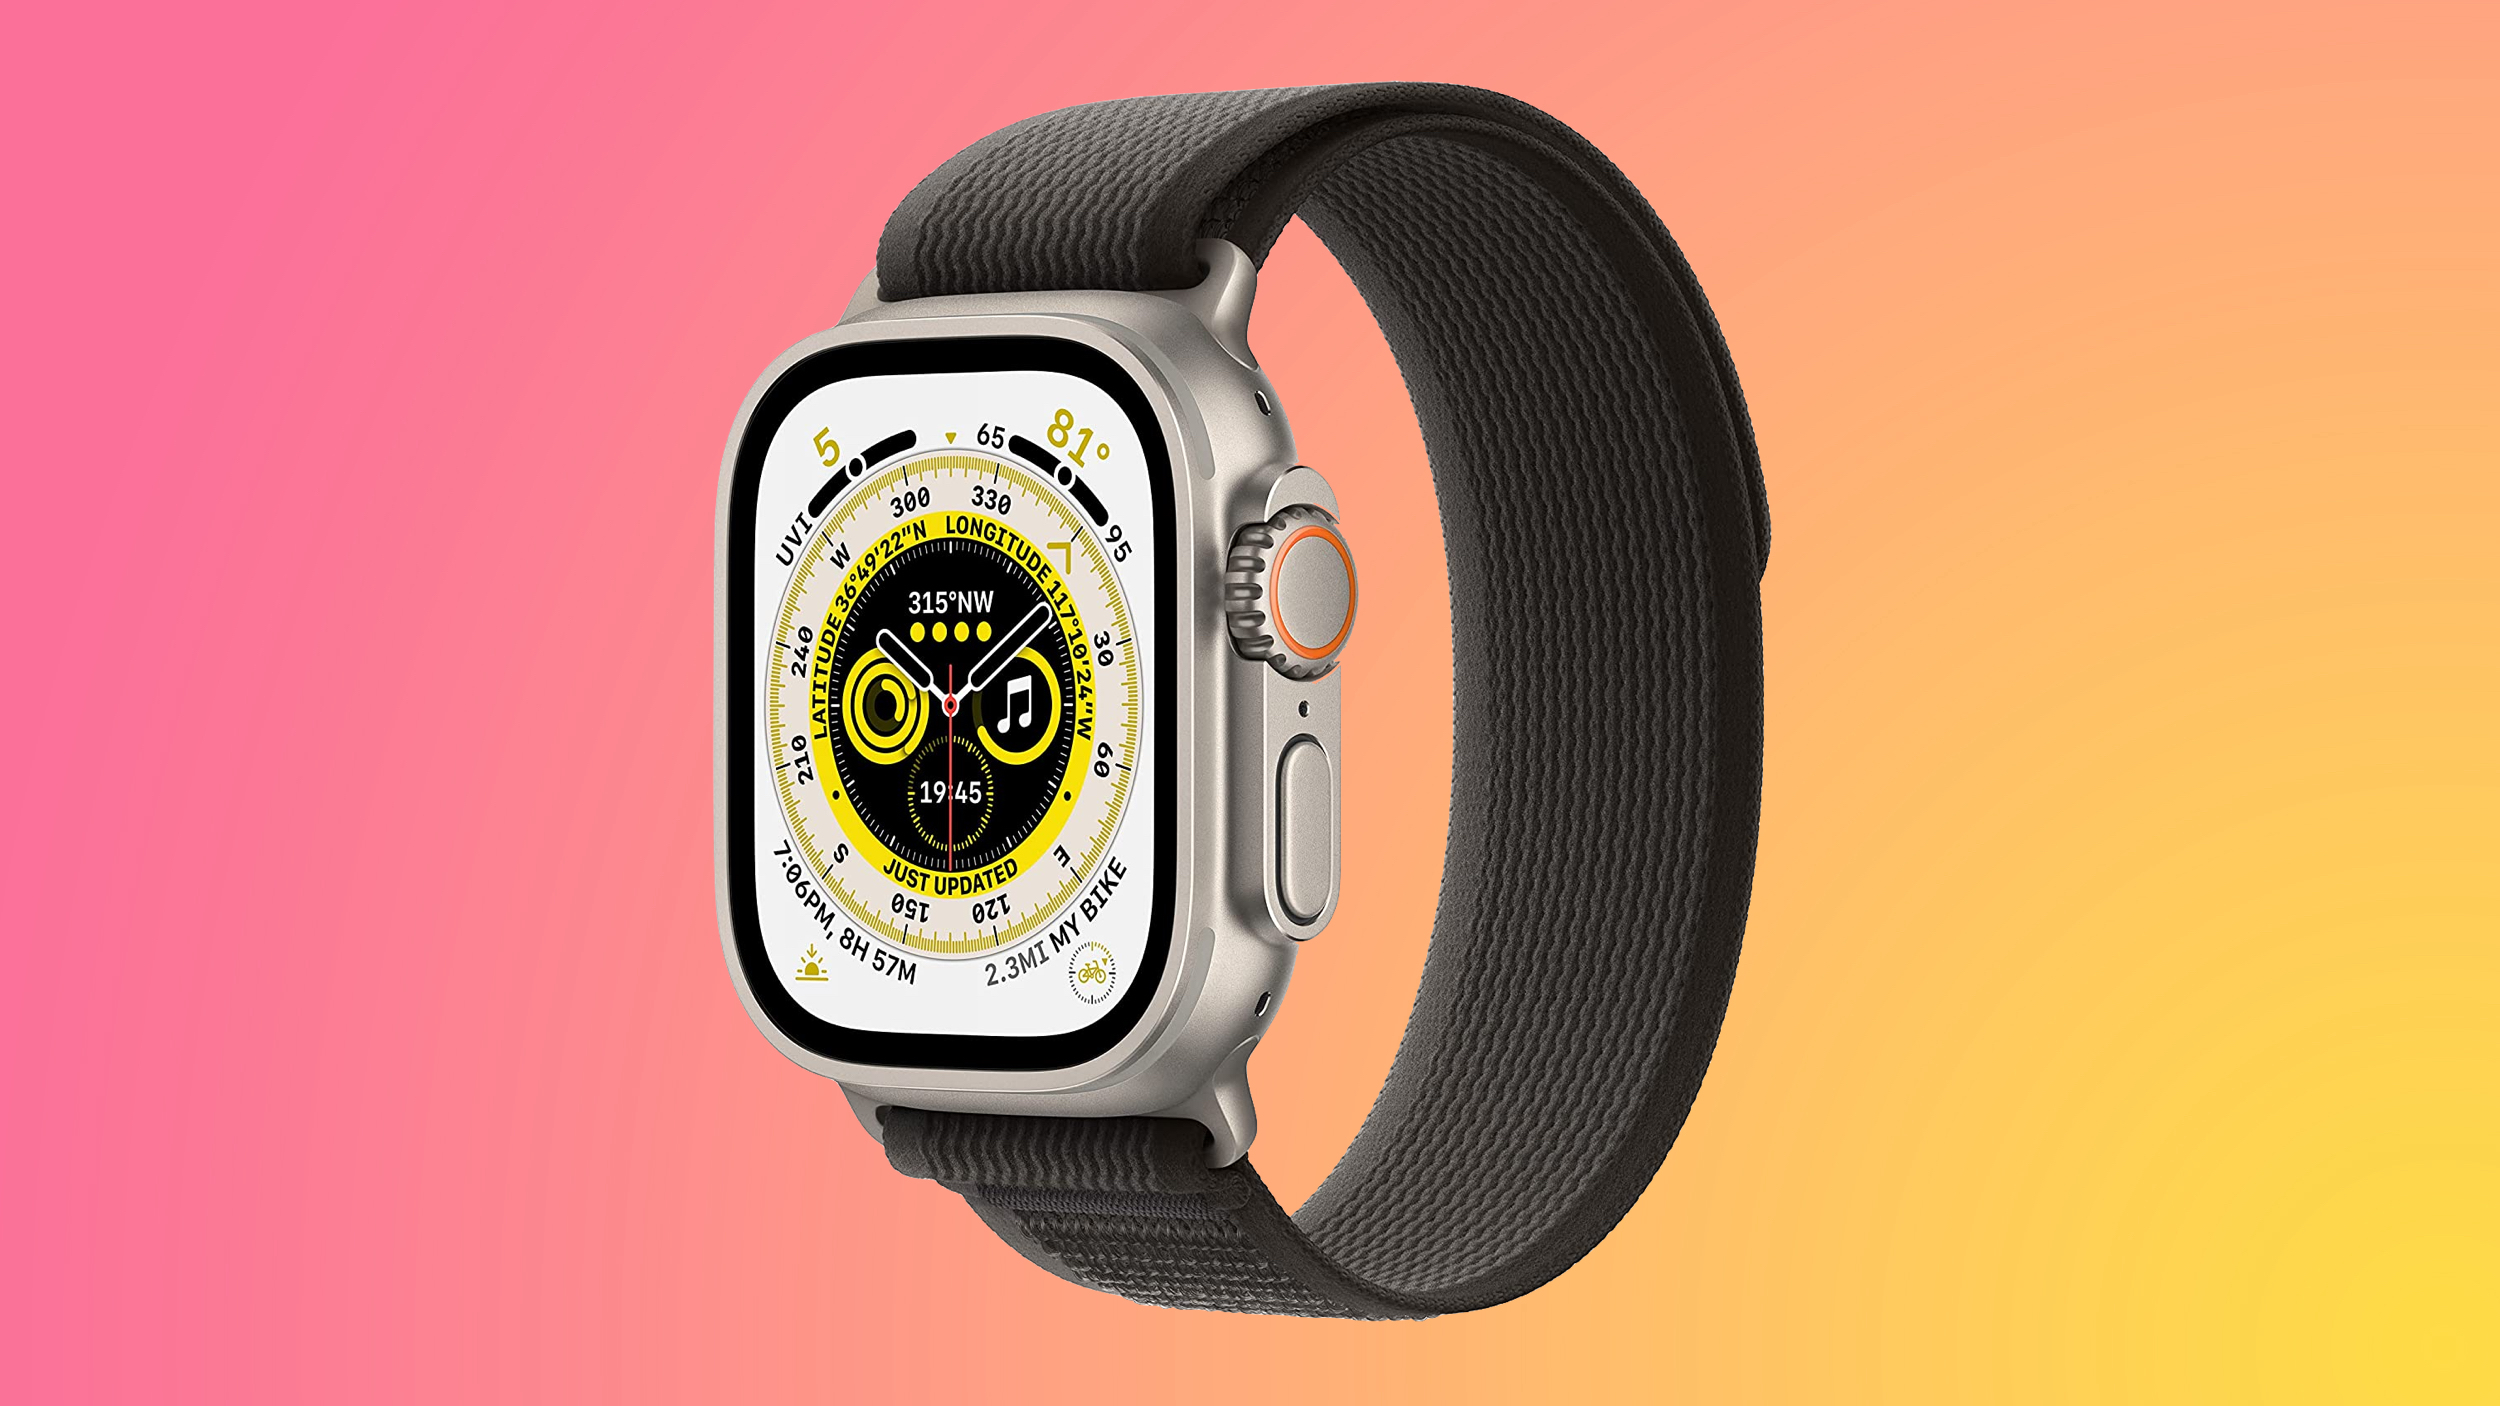 Next Major Apple Watch Ultra Upgrade Rumored to Be MicroLED Display Technology